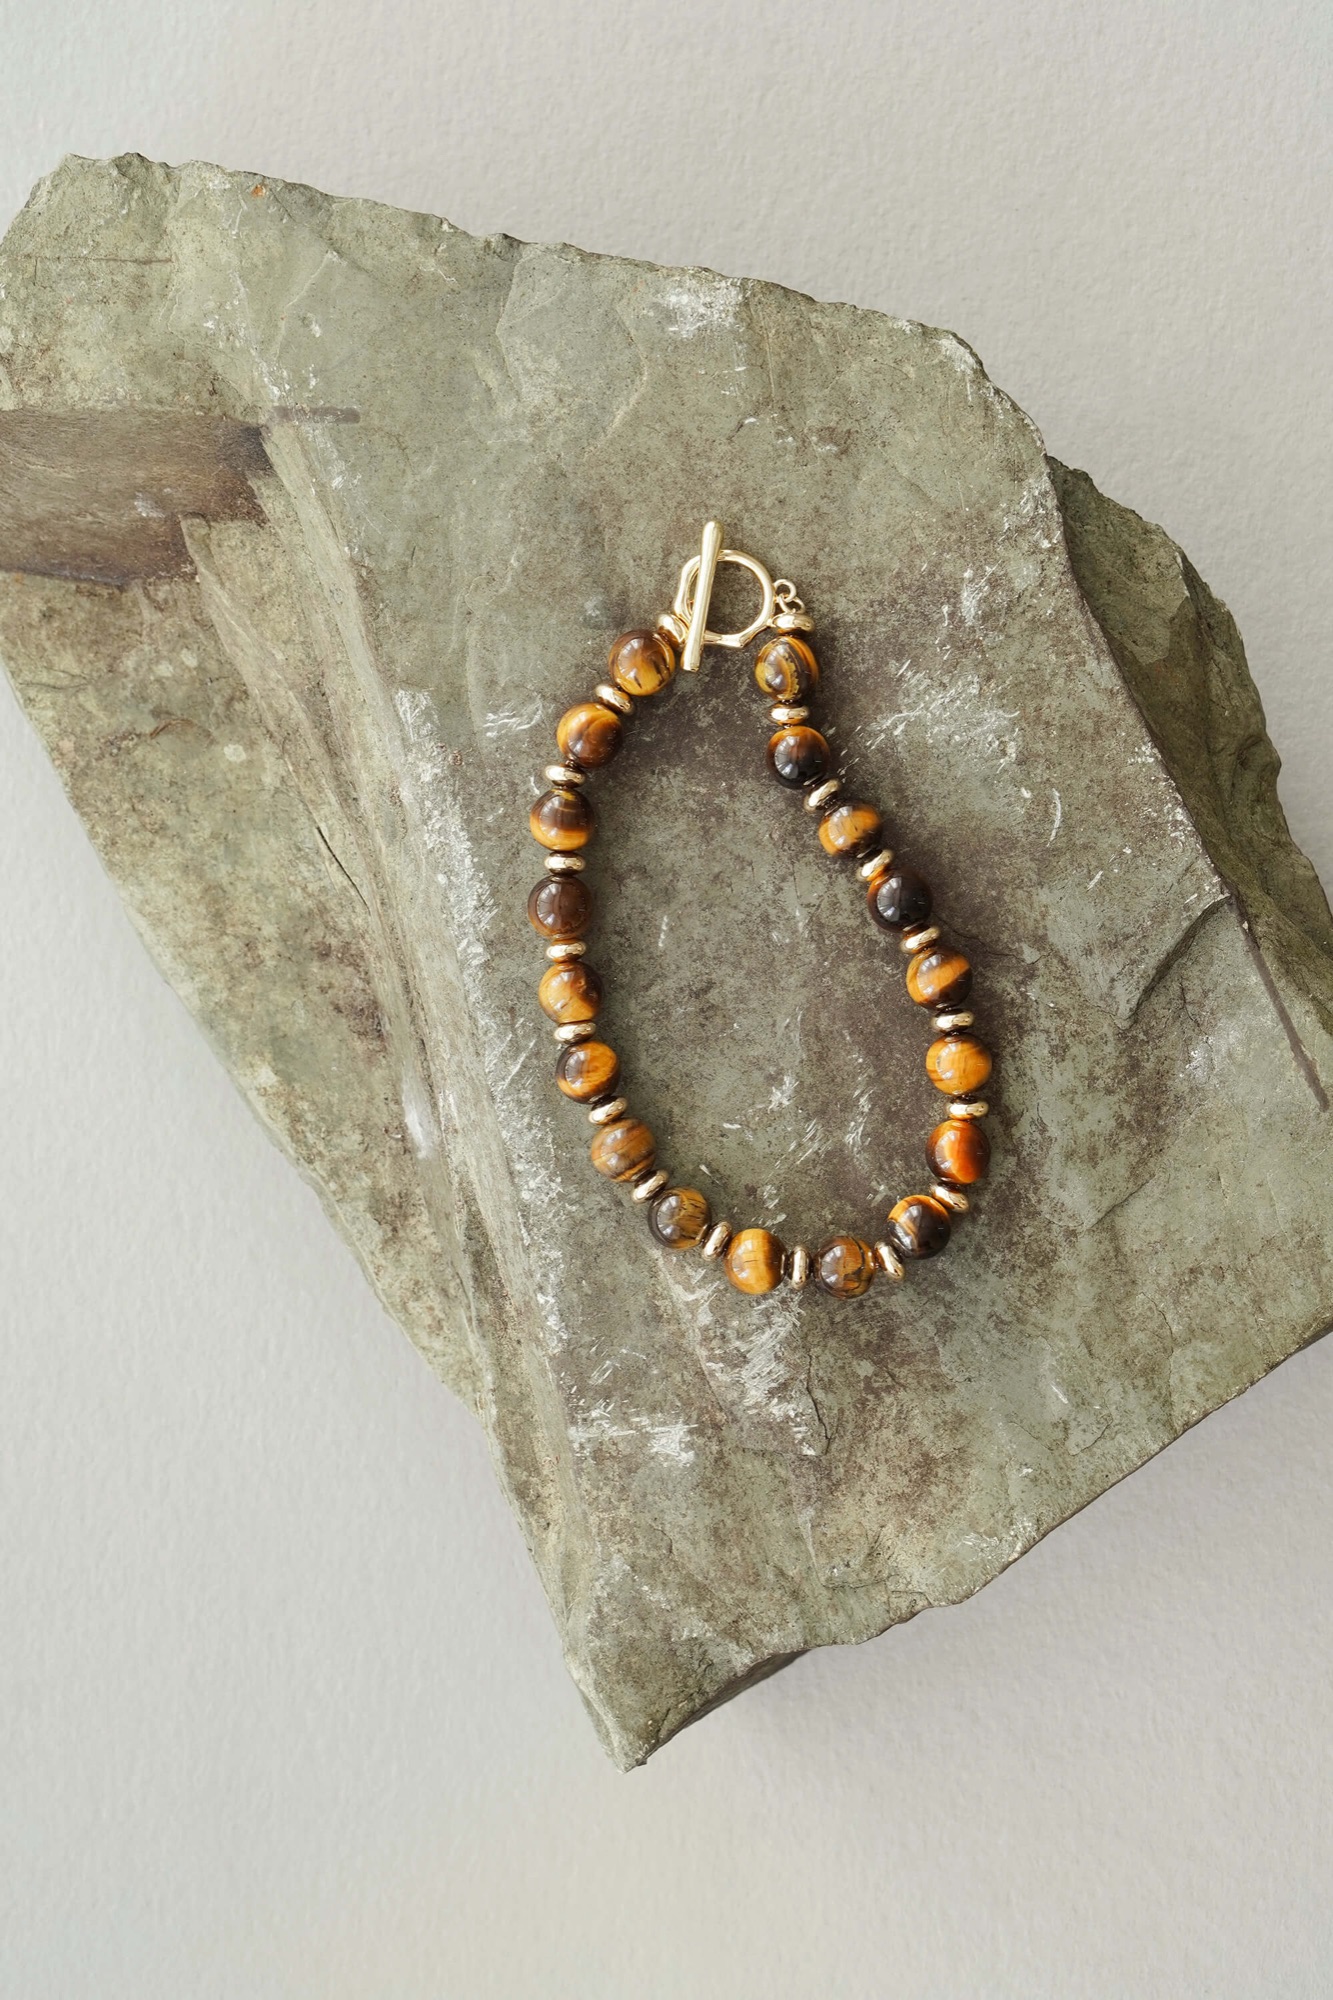 Masculine Elegance: Tiger's Eye Crystal Bracelets for Protection, Confidence, and Style